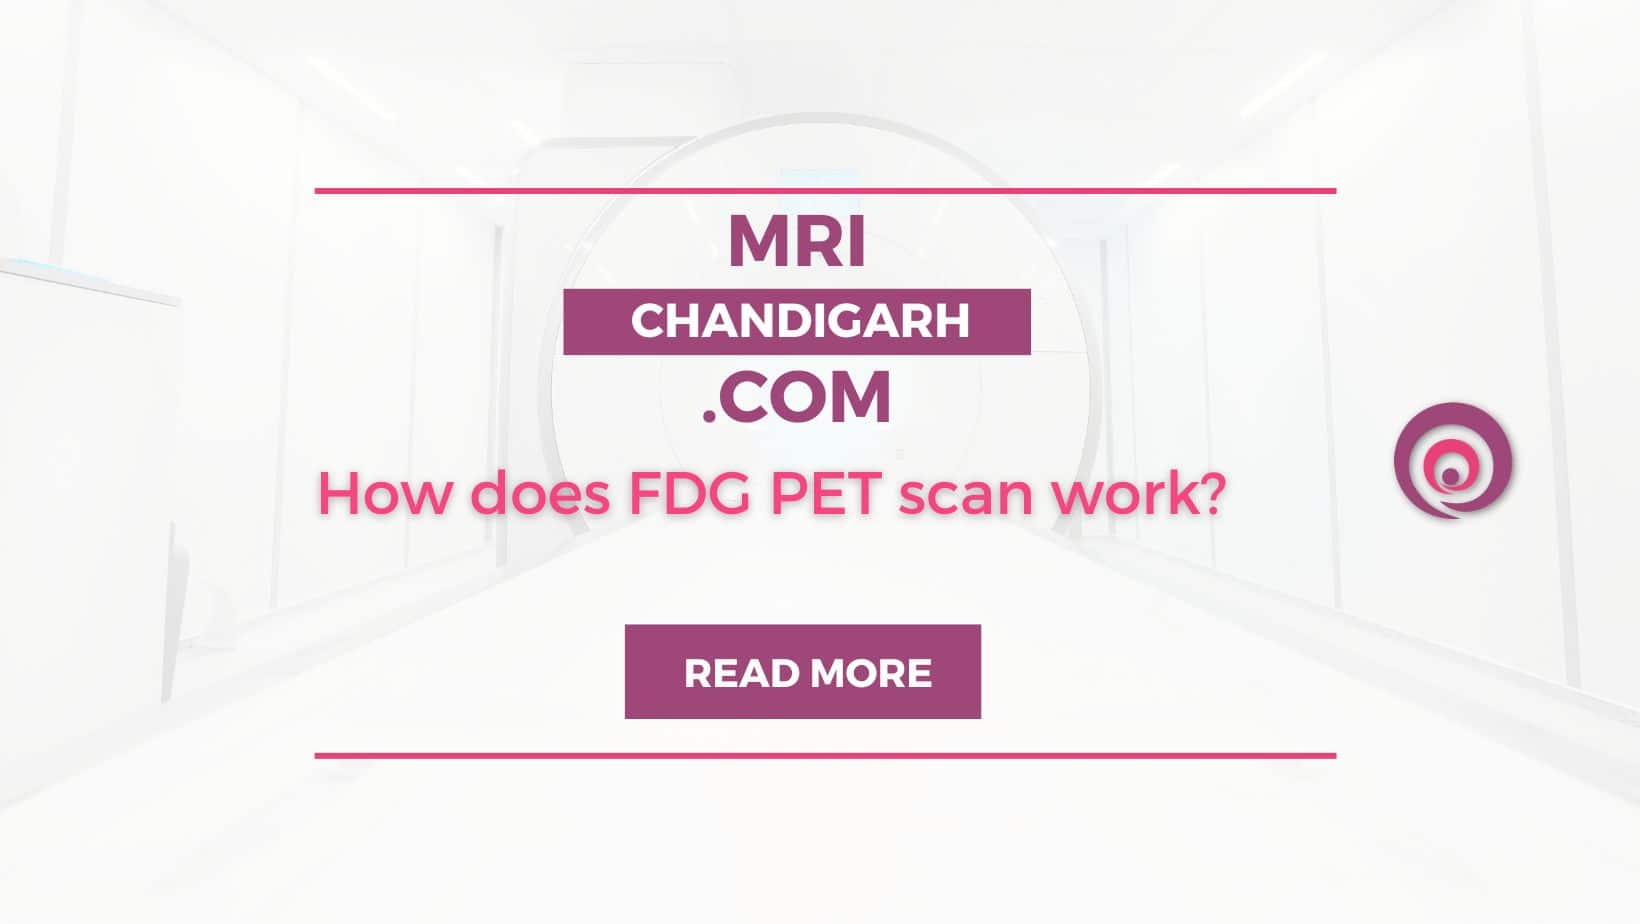 How does FDG PET scan work?